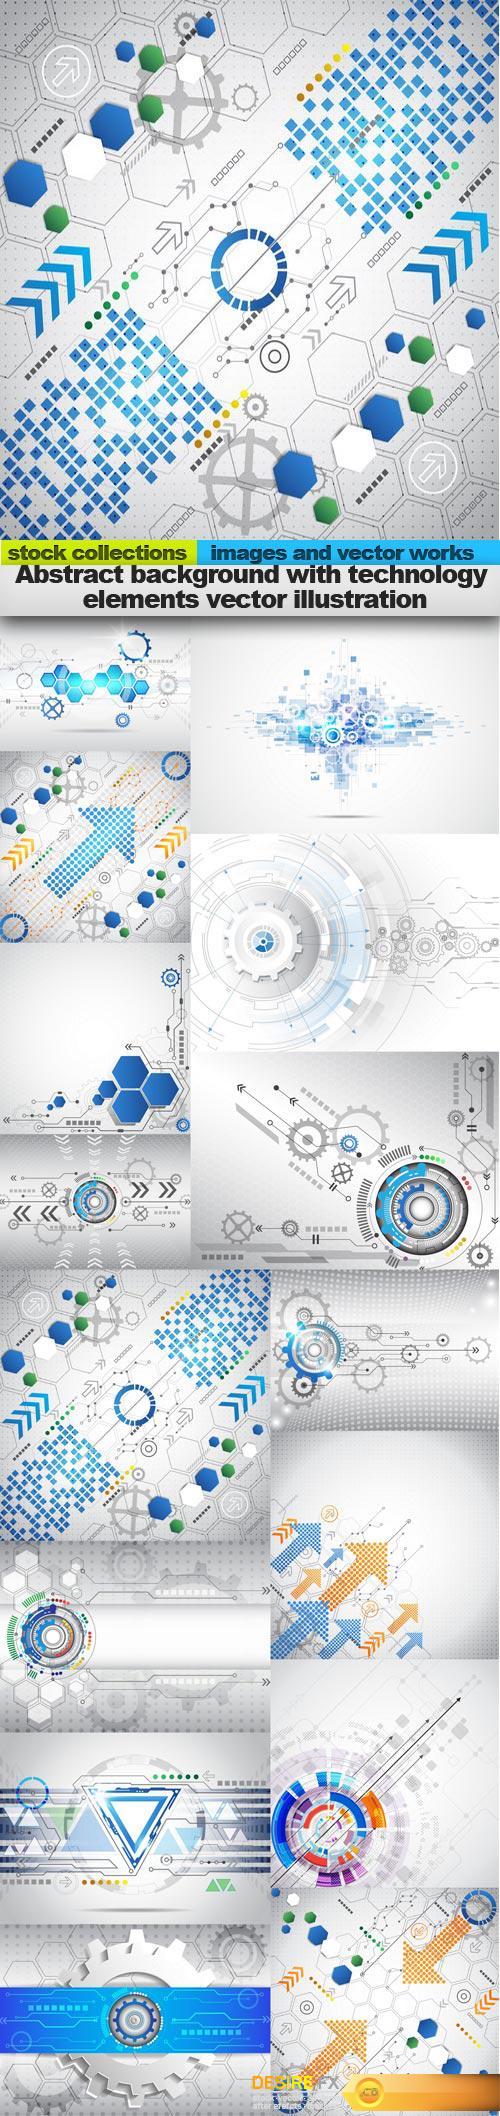 Abstract background with technology elements vector illustration, 15 x EPS